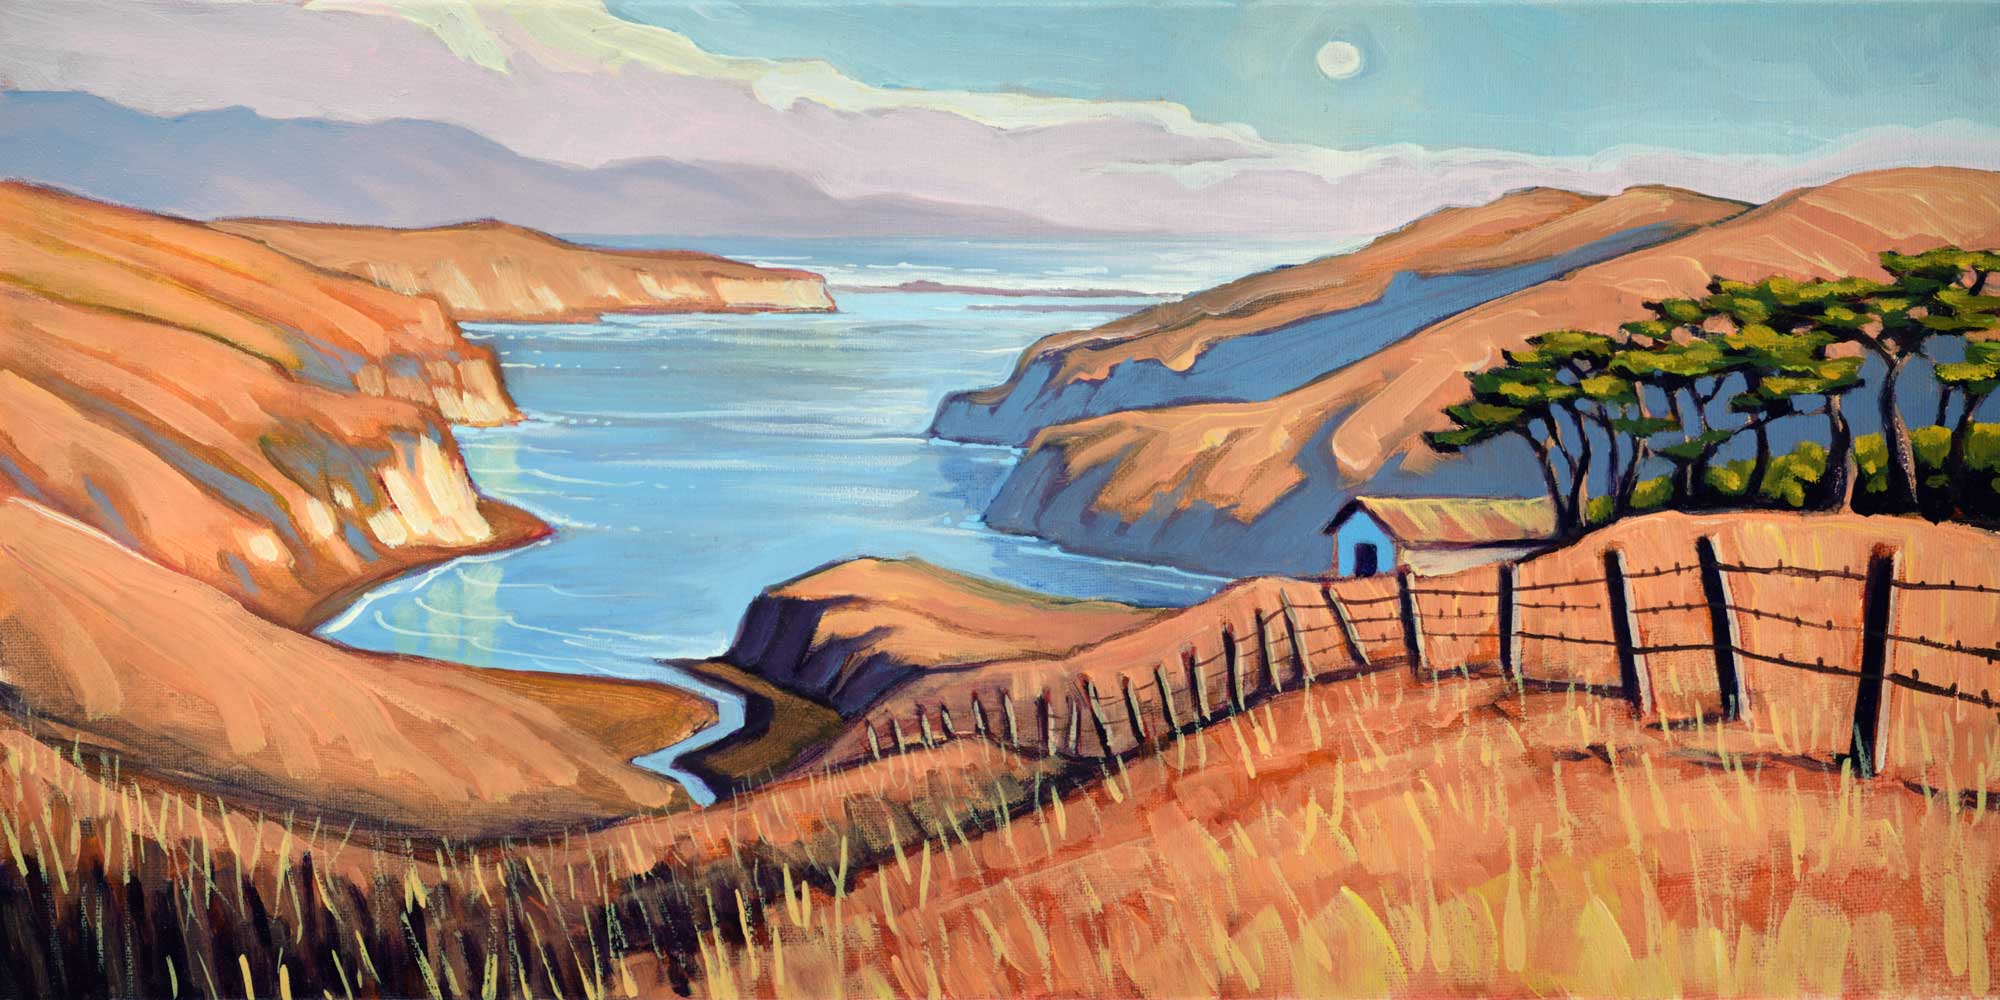 Plein air painting of a cattle ranch at Drake's Estero at Point Reyes National Park on the Marin coast of California